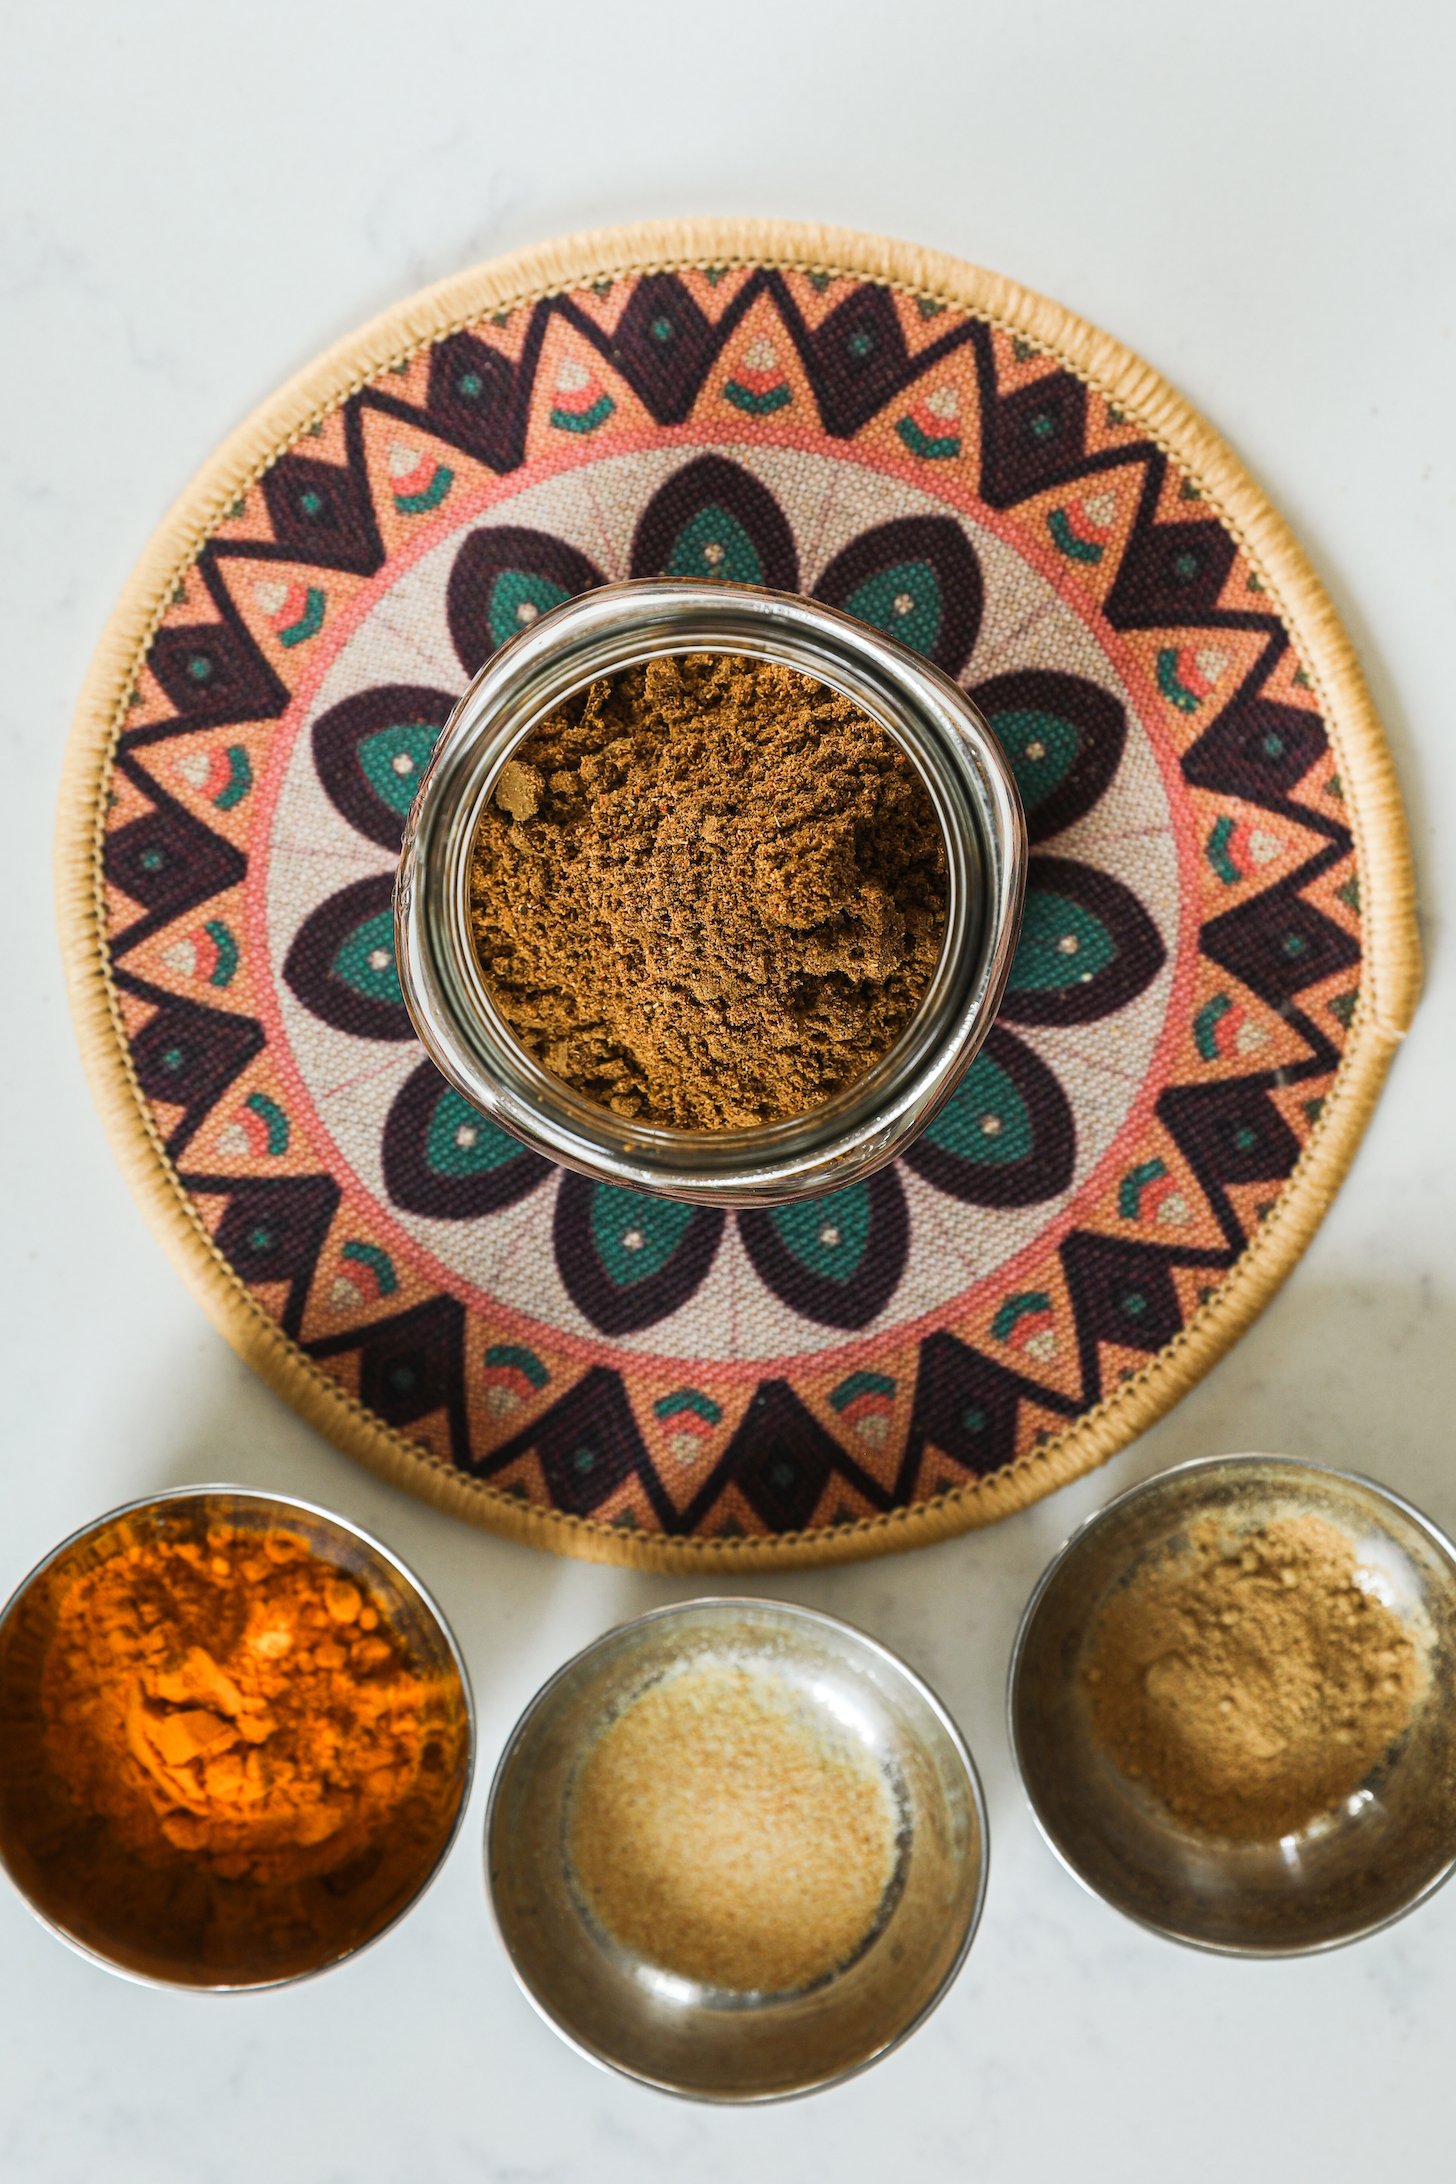 Top view of a jar of ground brown spices on a patterned placemat with 3 ramekins of ground spices arranged close by.